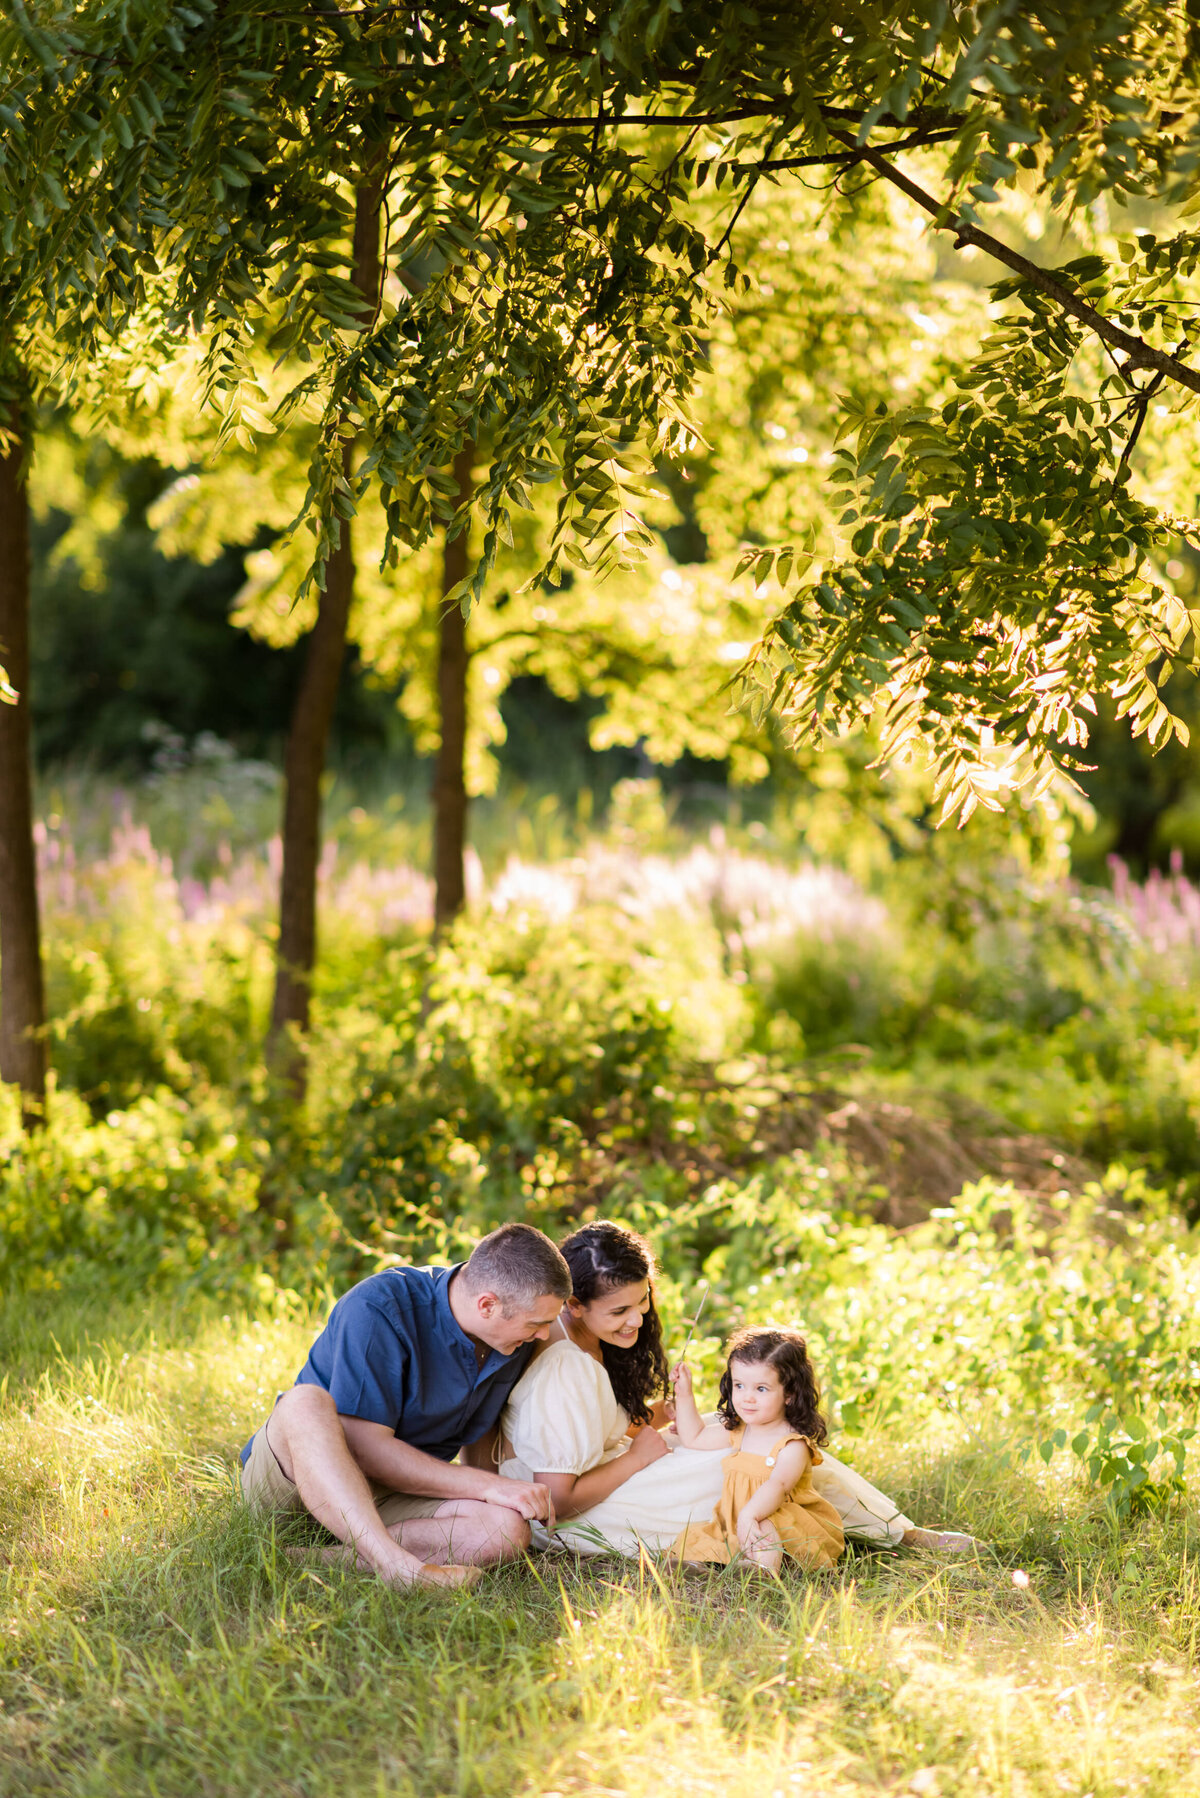 Boston-family-photographer-bella-wang-photography-Lifestyle-session-outdoor-wildflower-36